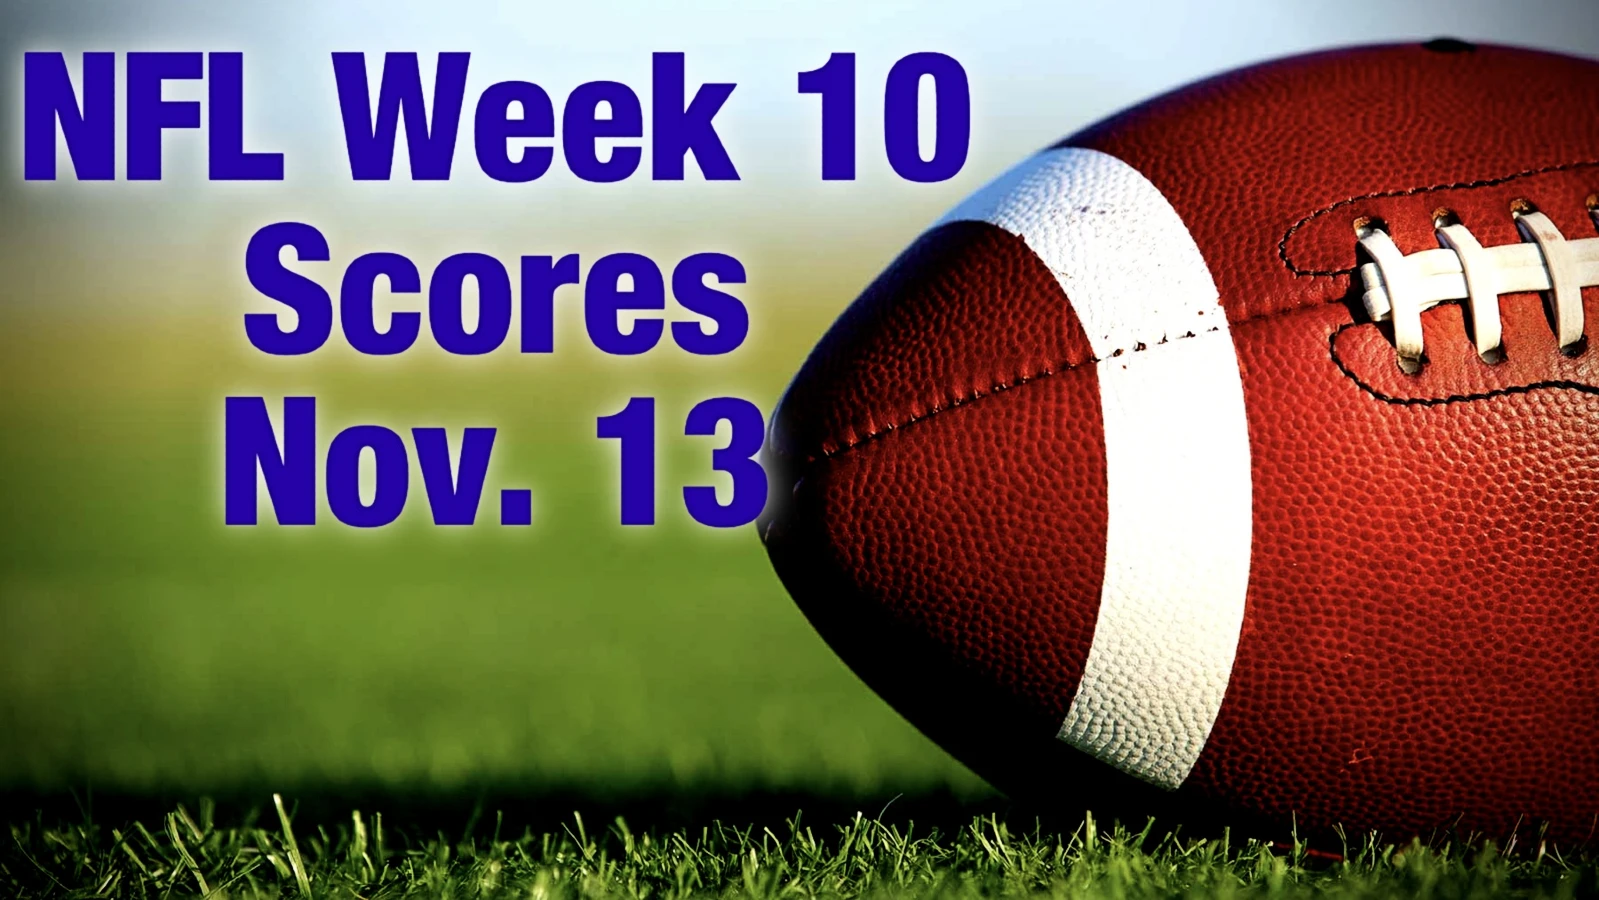 NFL Week 10 scores and box scores